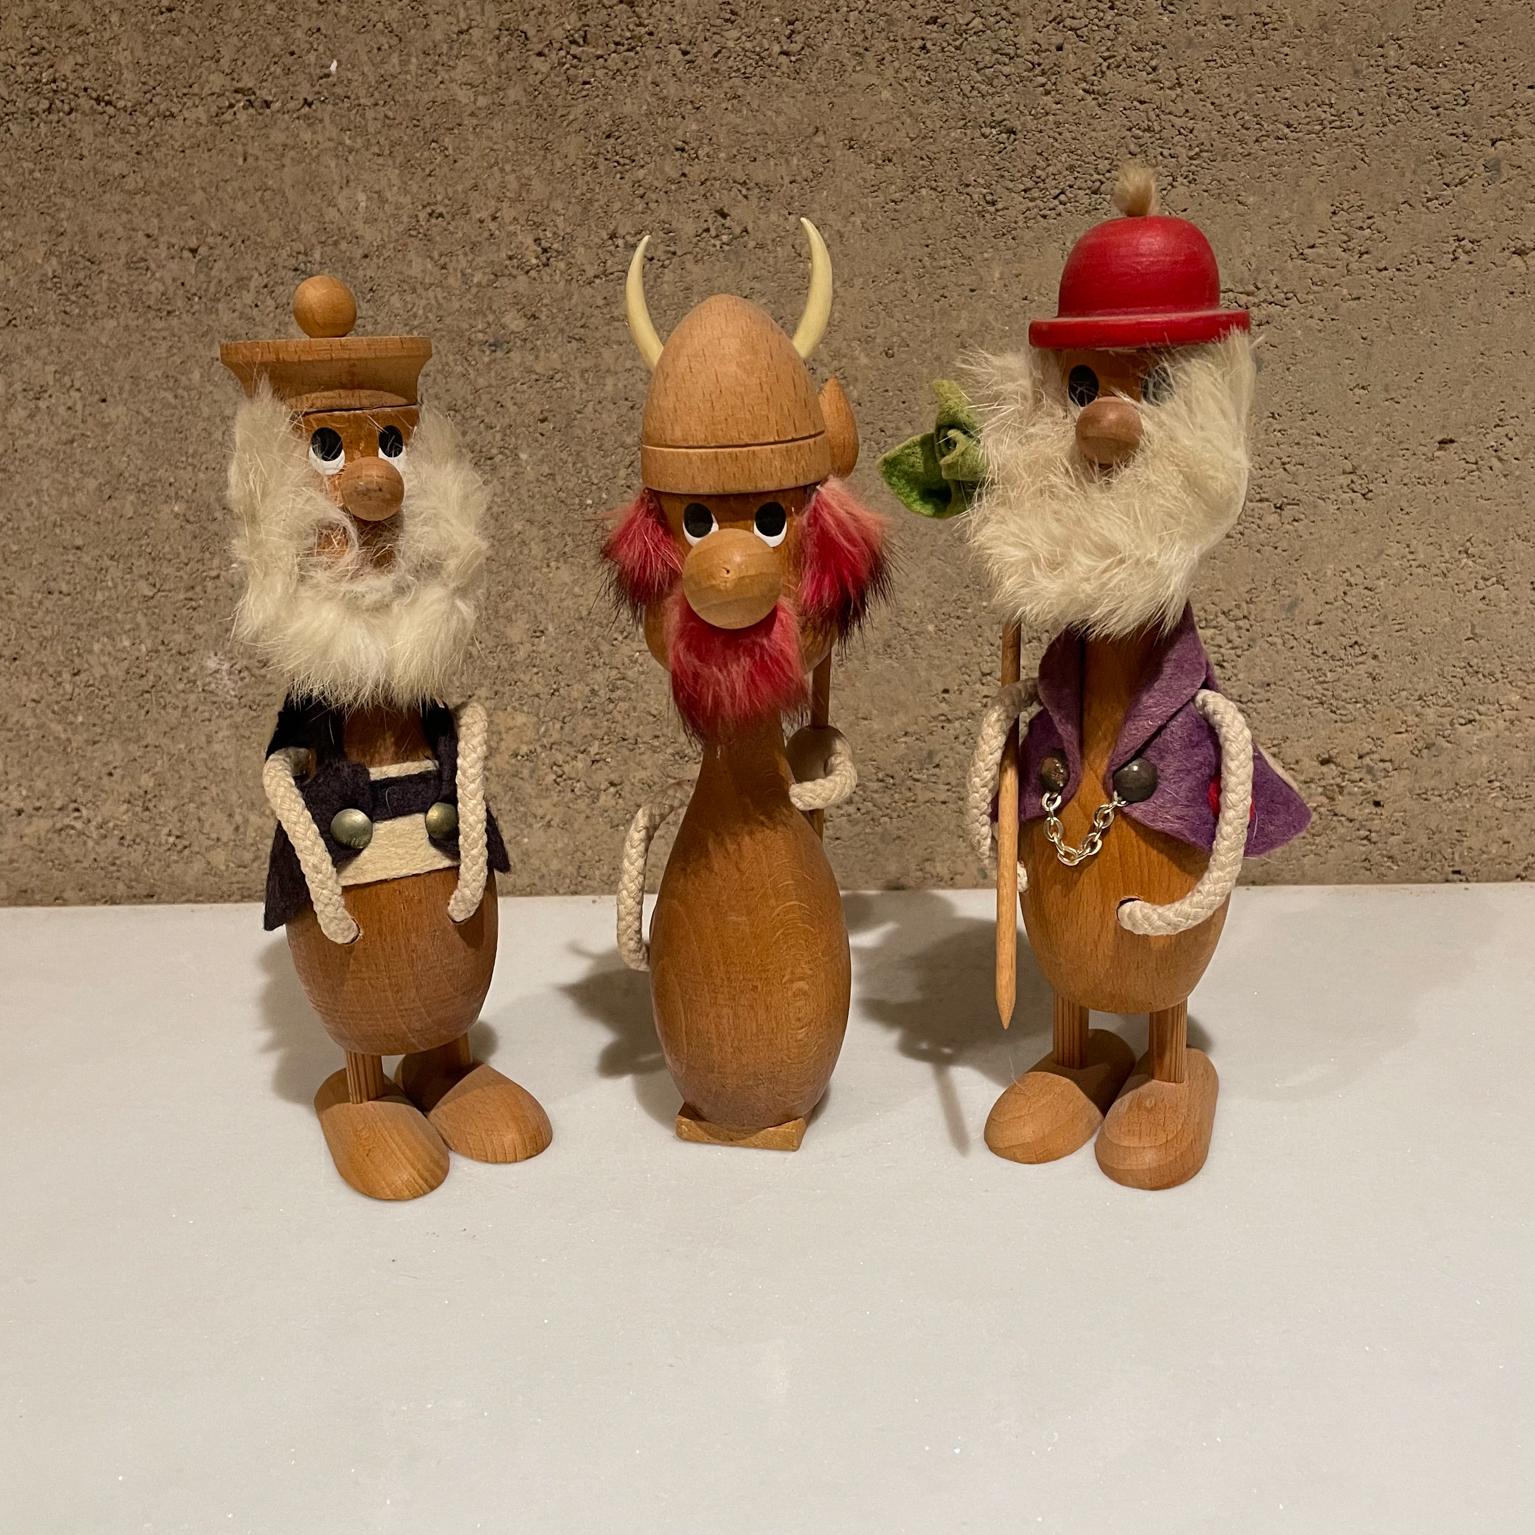 Set of three wooden toys with furry beards made in Denmark.
In the Style of Kay Bojesen Denmark 1960s
The tallest Viking is 8 1/4T x 3 W x 4 D
Maker stamped Denmark circa 1960s 
Original preowned vintage condition.
Refer to images provided.